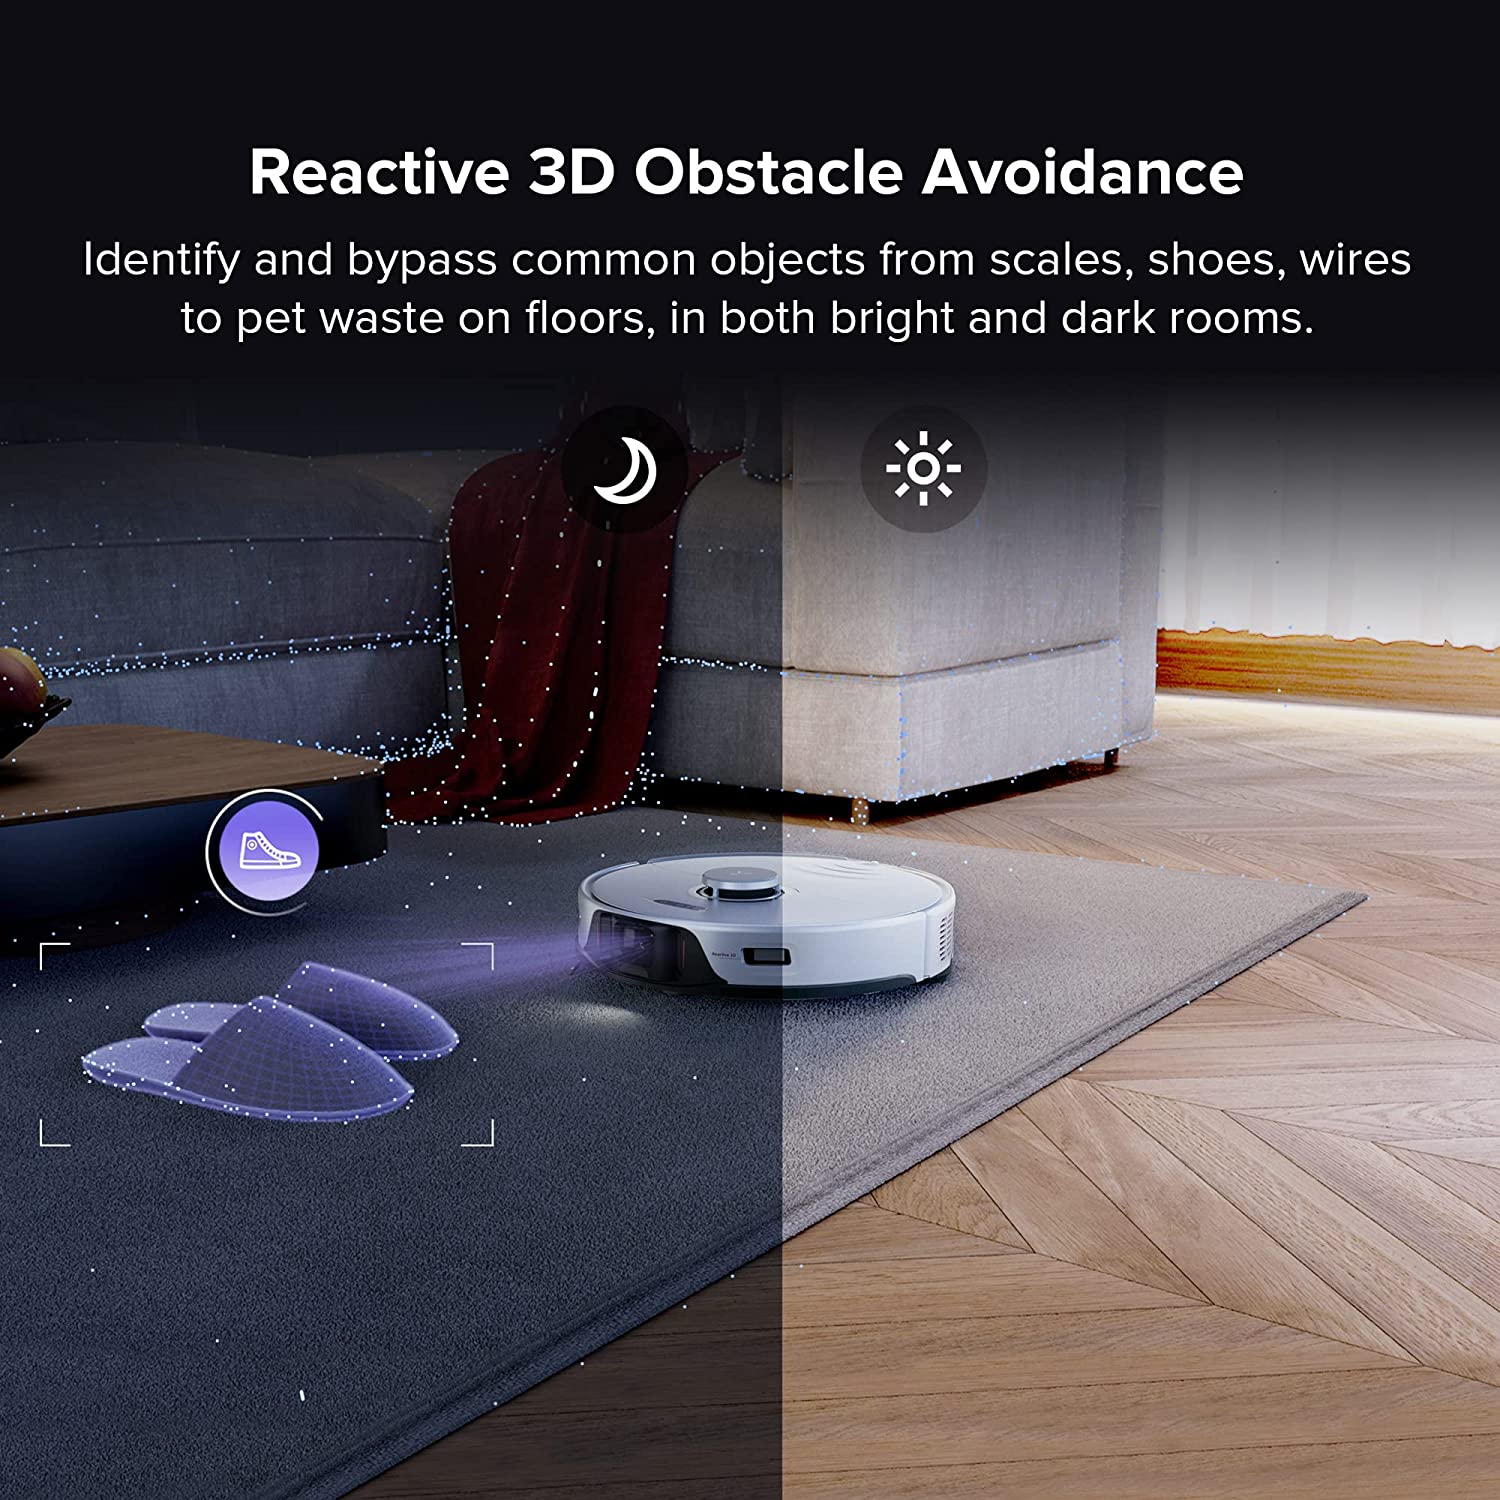 Roborock S8 Pro Ultra Robot Vacuum and Mop, Auto-Drying, Self-Washing, Liftable Dual Brush & Sonic Mop, 6000Pa Suction, Self-Refilling, Self-Emptying, Reactive 3D Obstacle Avoidance, White